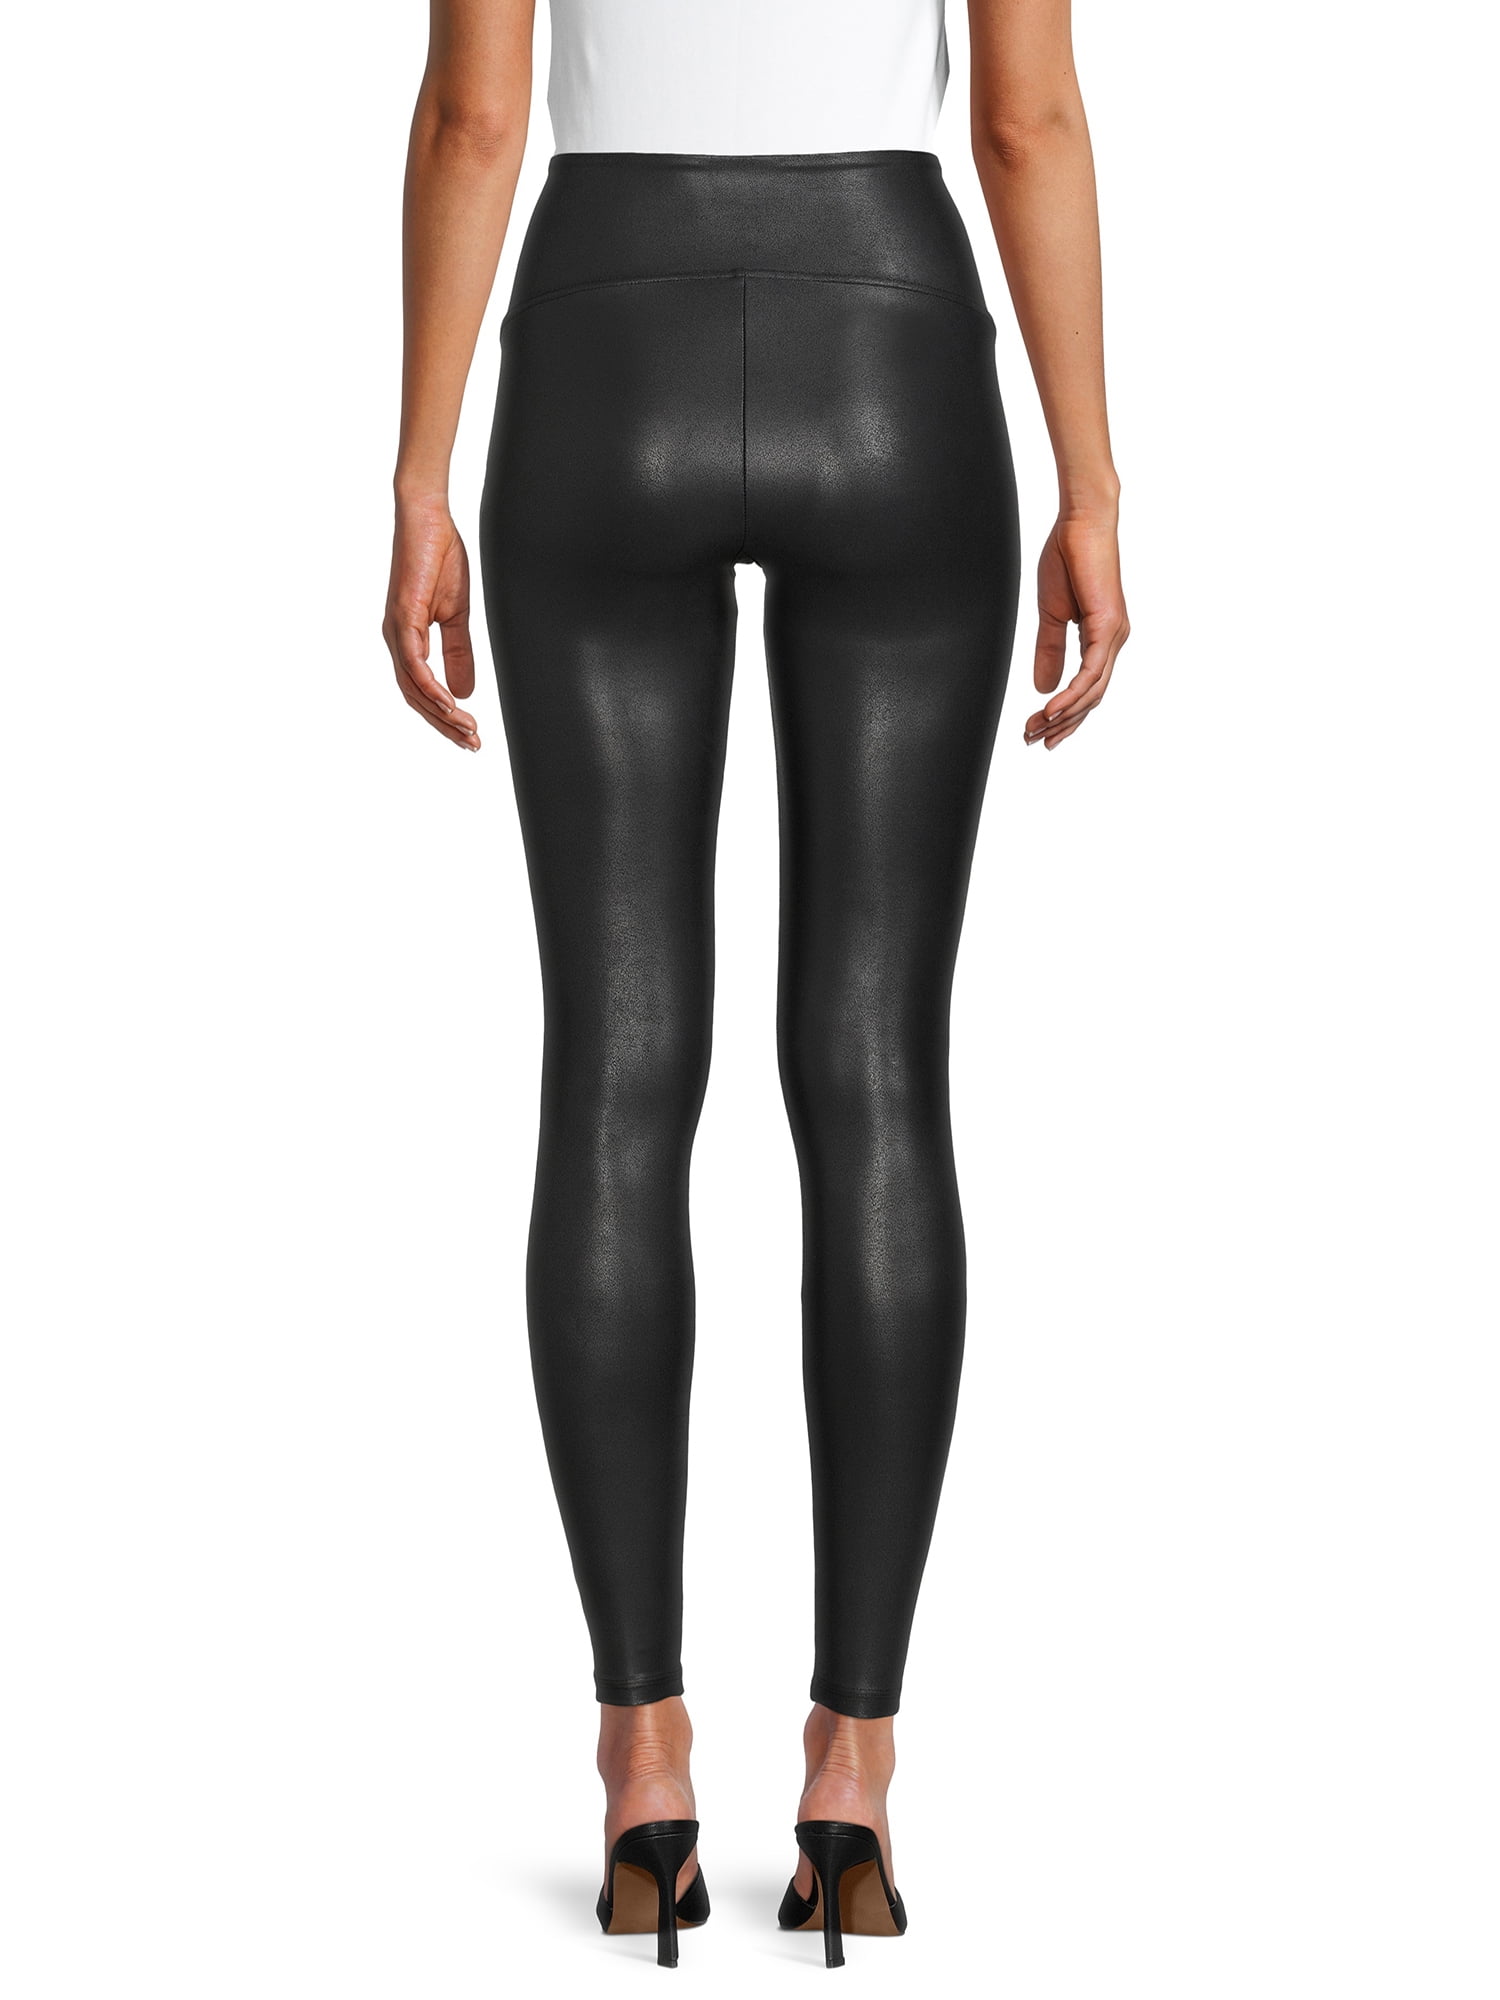 HONEYLOVE NEW FAUX LEATHER LEGGINGS VS SPANX.Let's compare for a REAL  WOMAN 